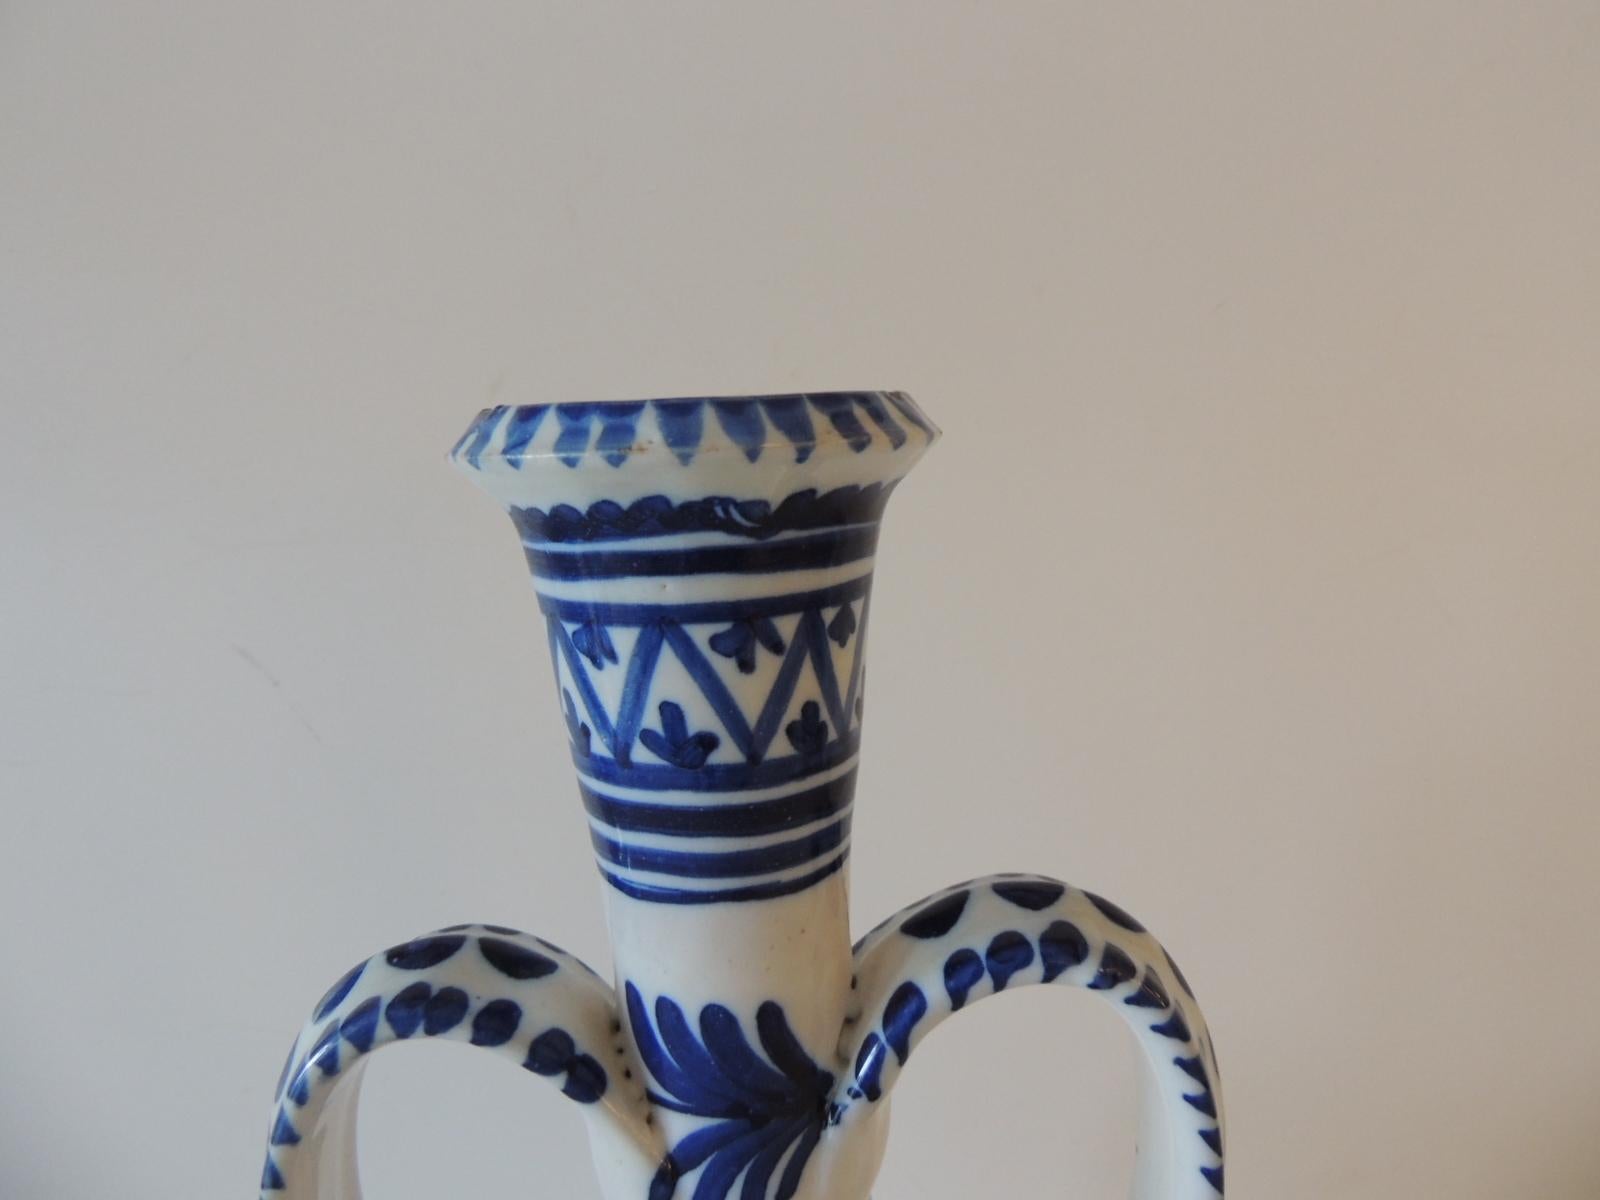 Vintage blue and white Mexican pottery amphora/vase
Size: 7